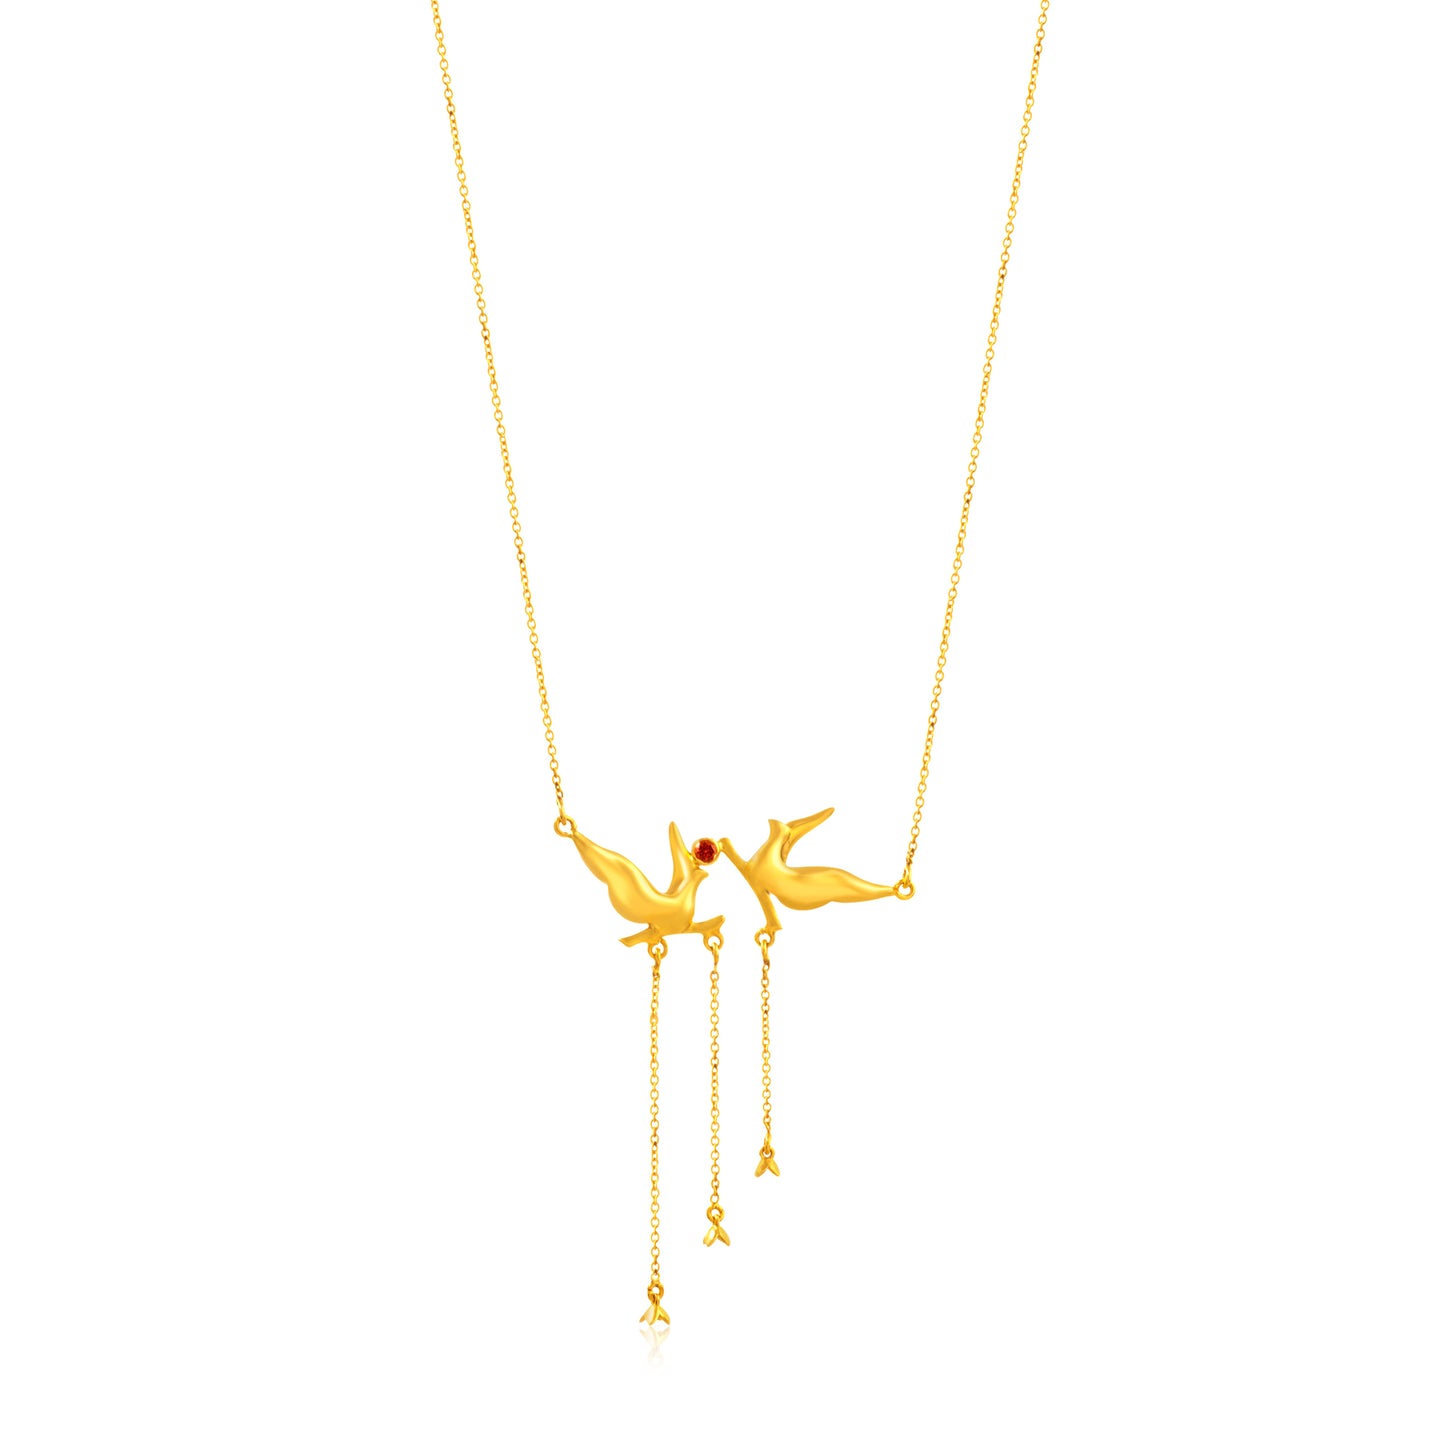 The gold Kiss of Love Necklace